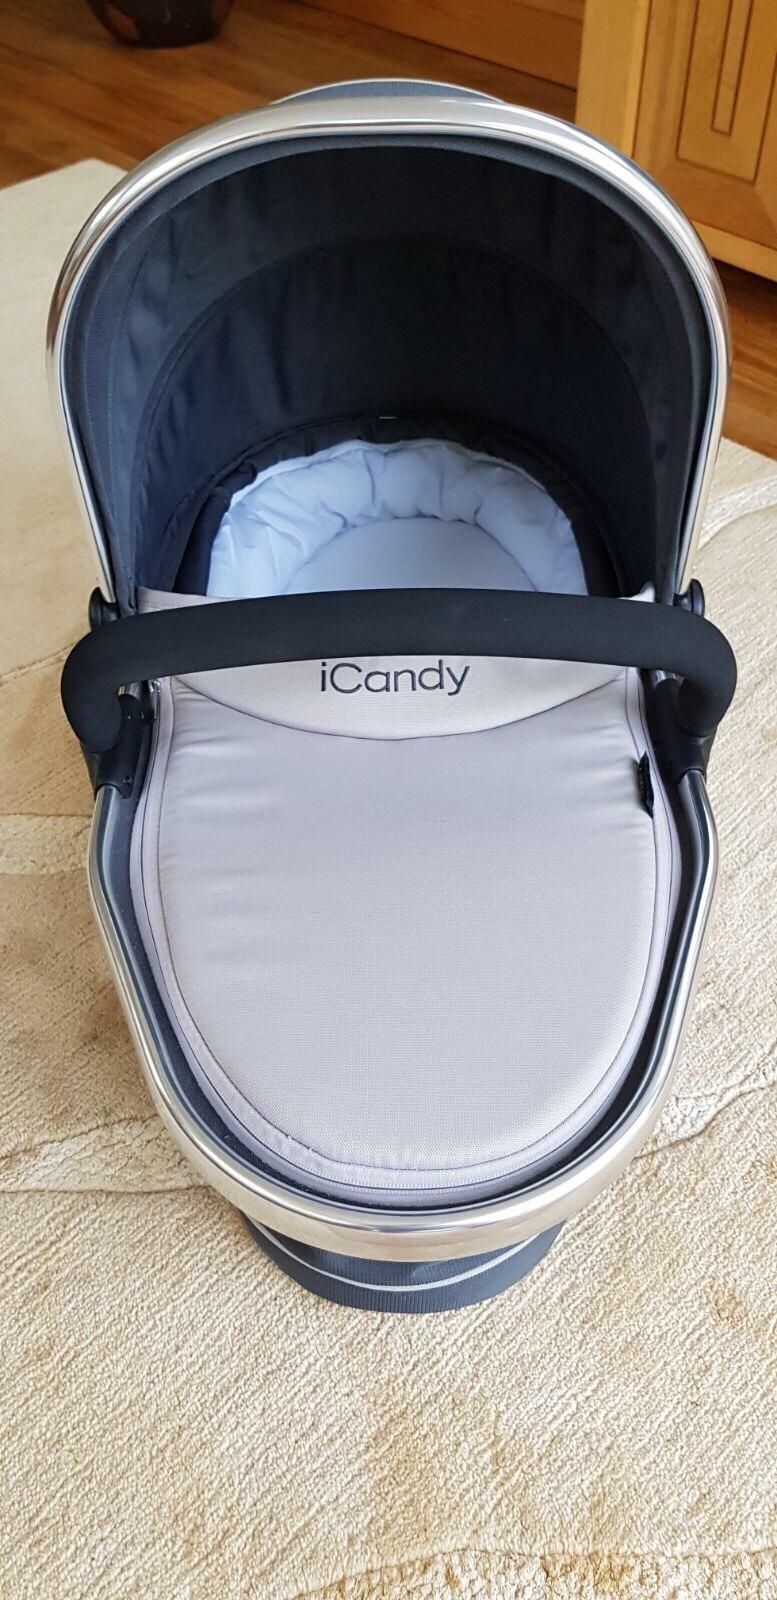 icandy peach 3 carrycot